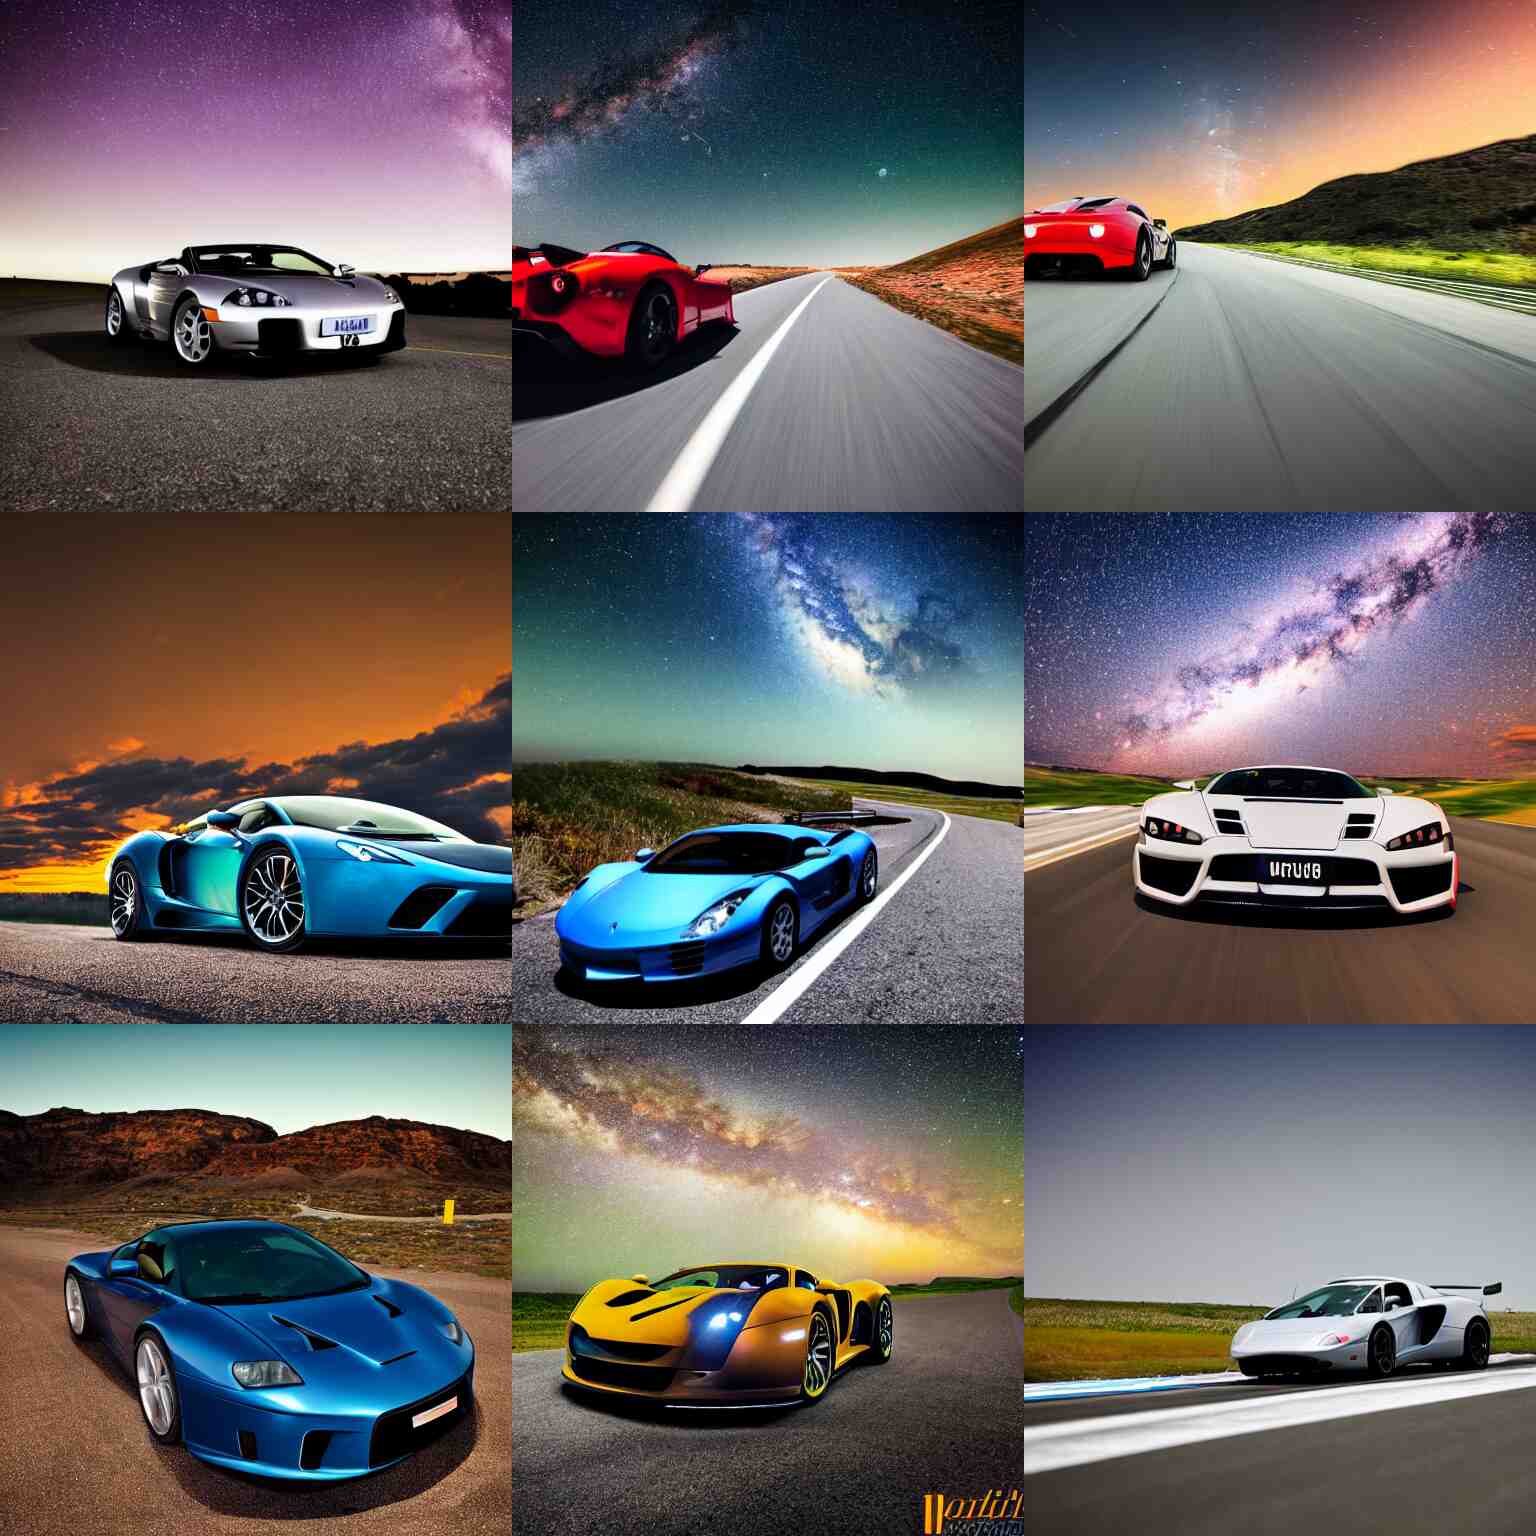 Where To Find A Reliable API For Categorizing Car Images Online